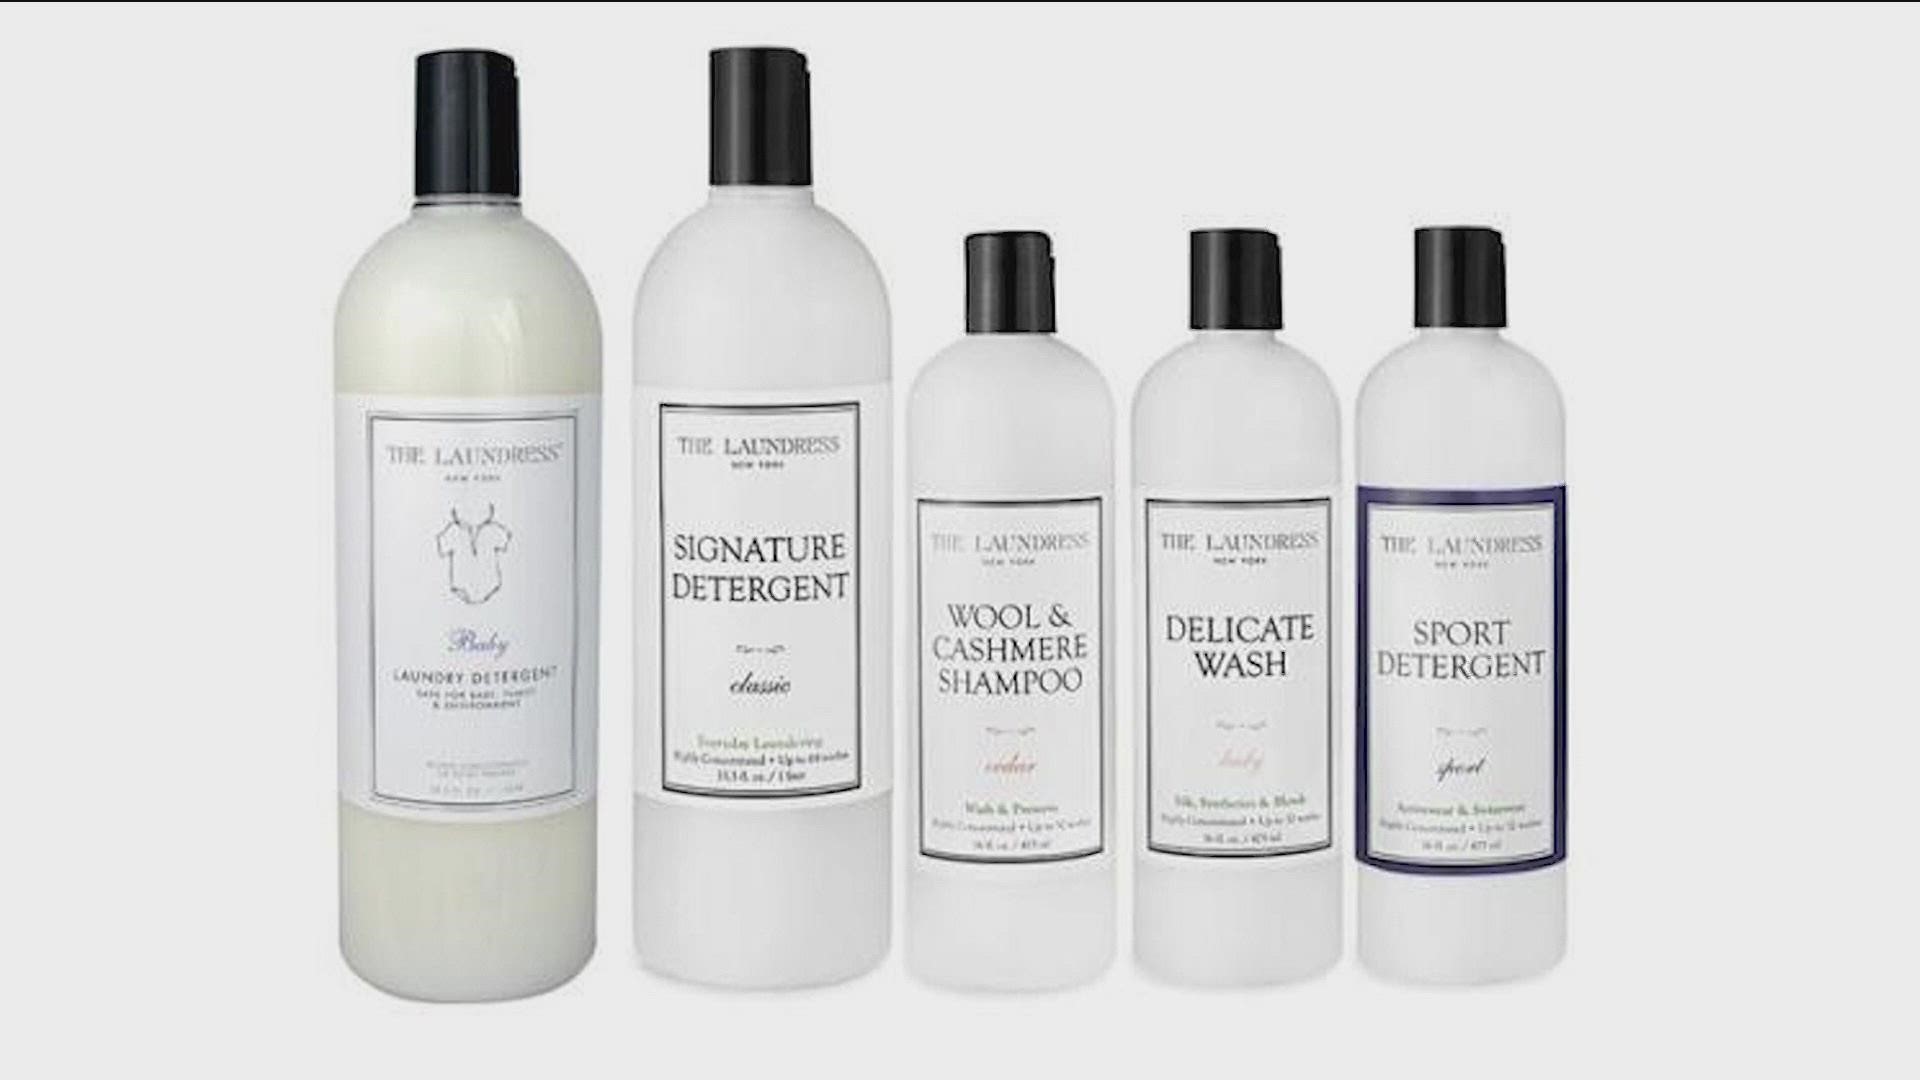 The Laundress brand says the items include laundry detergents, fabric conditioner, and cleaning products.